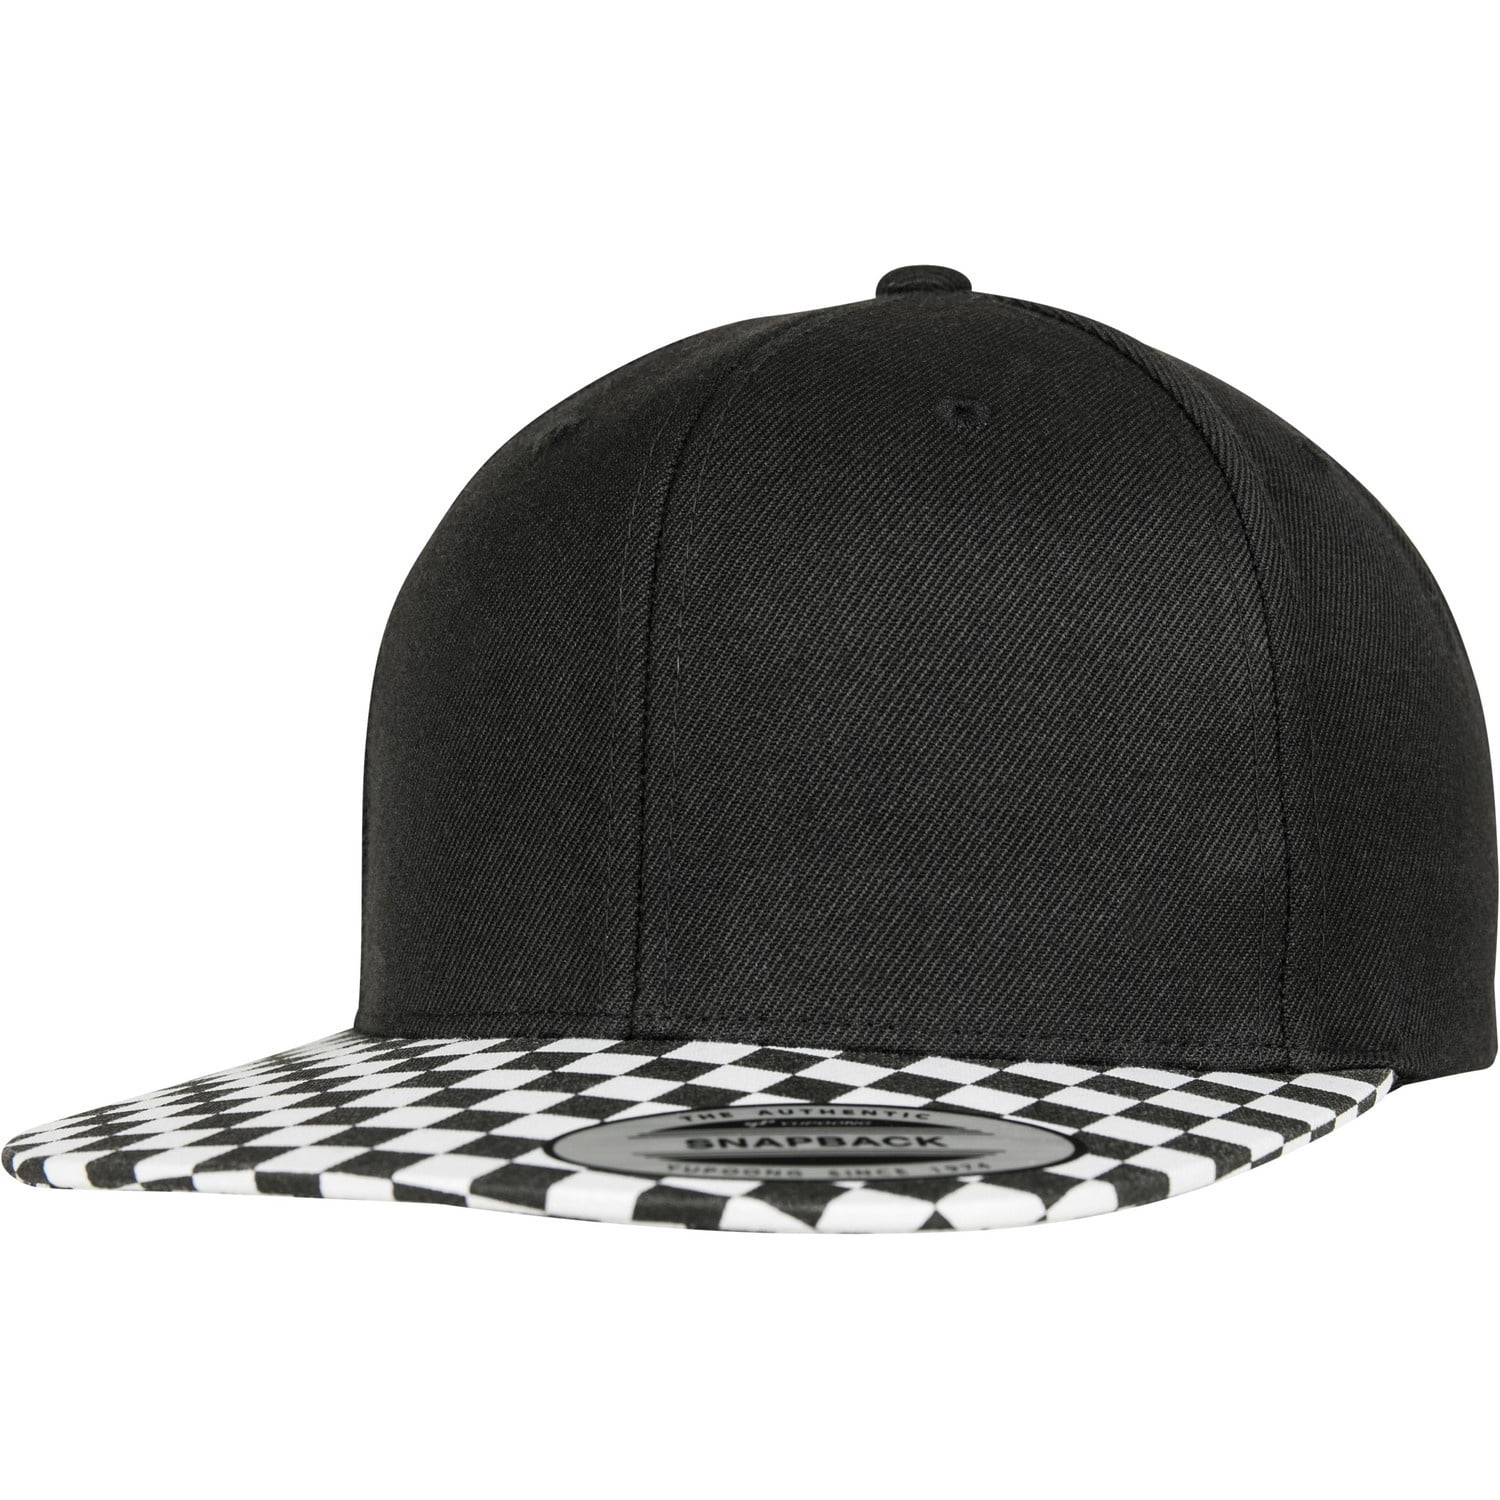 By Checkerboard Yupoong Snapback Flexfit Cap